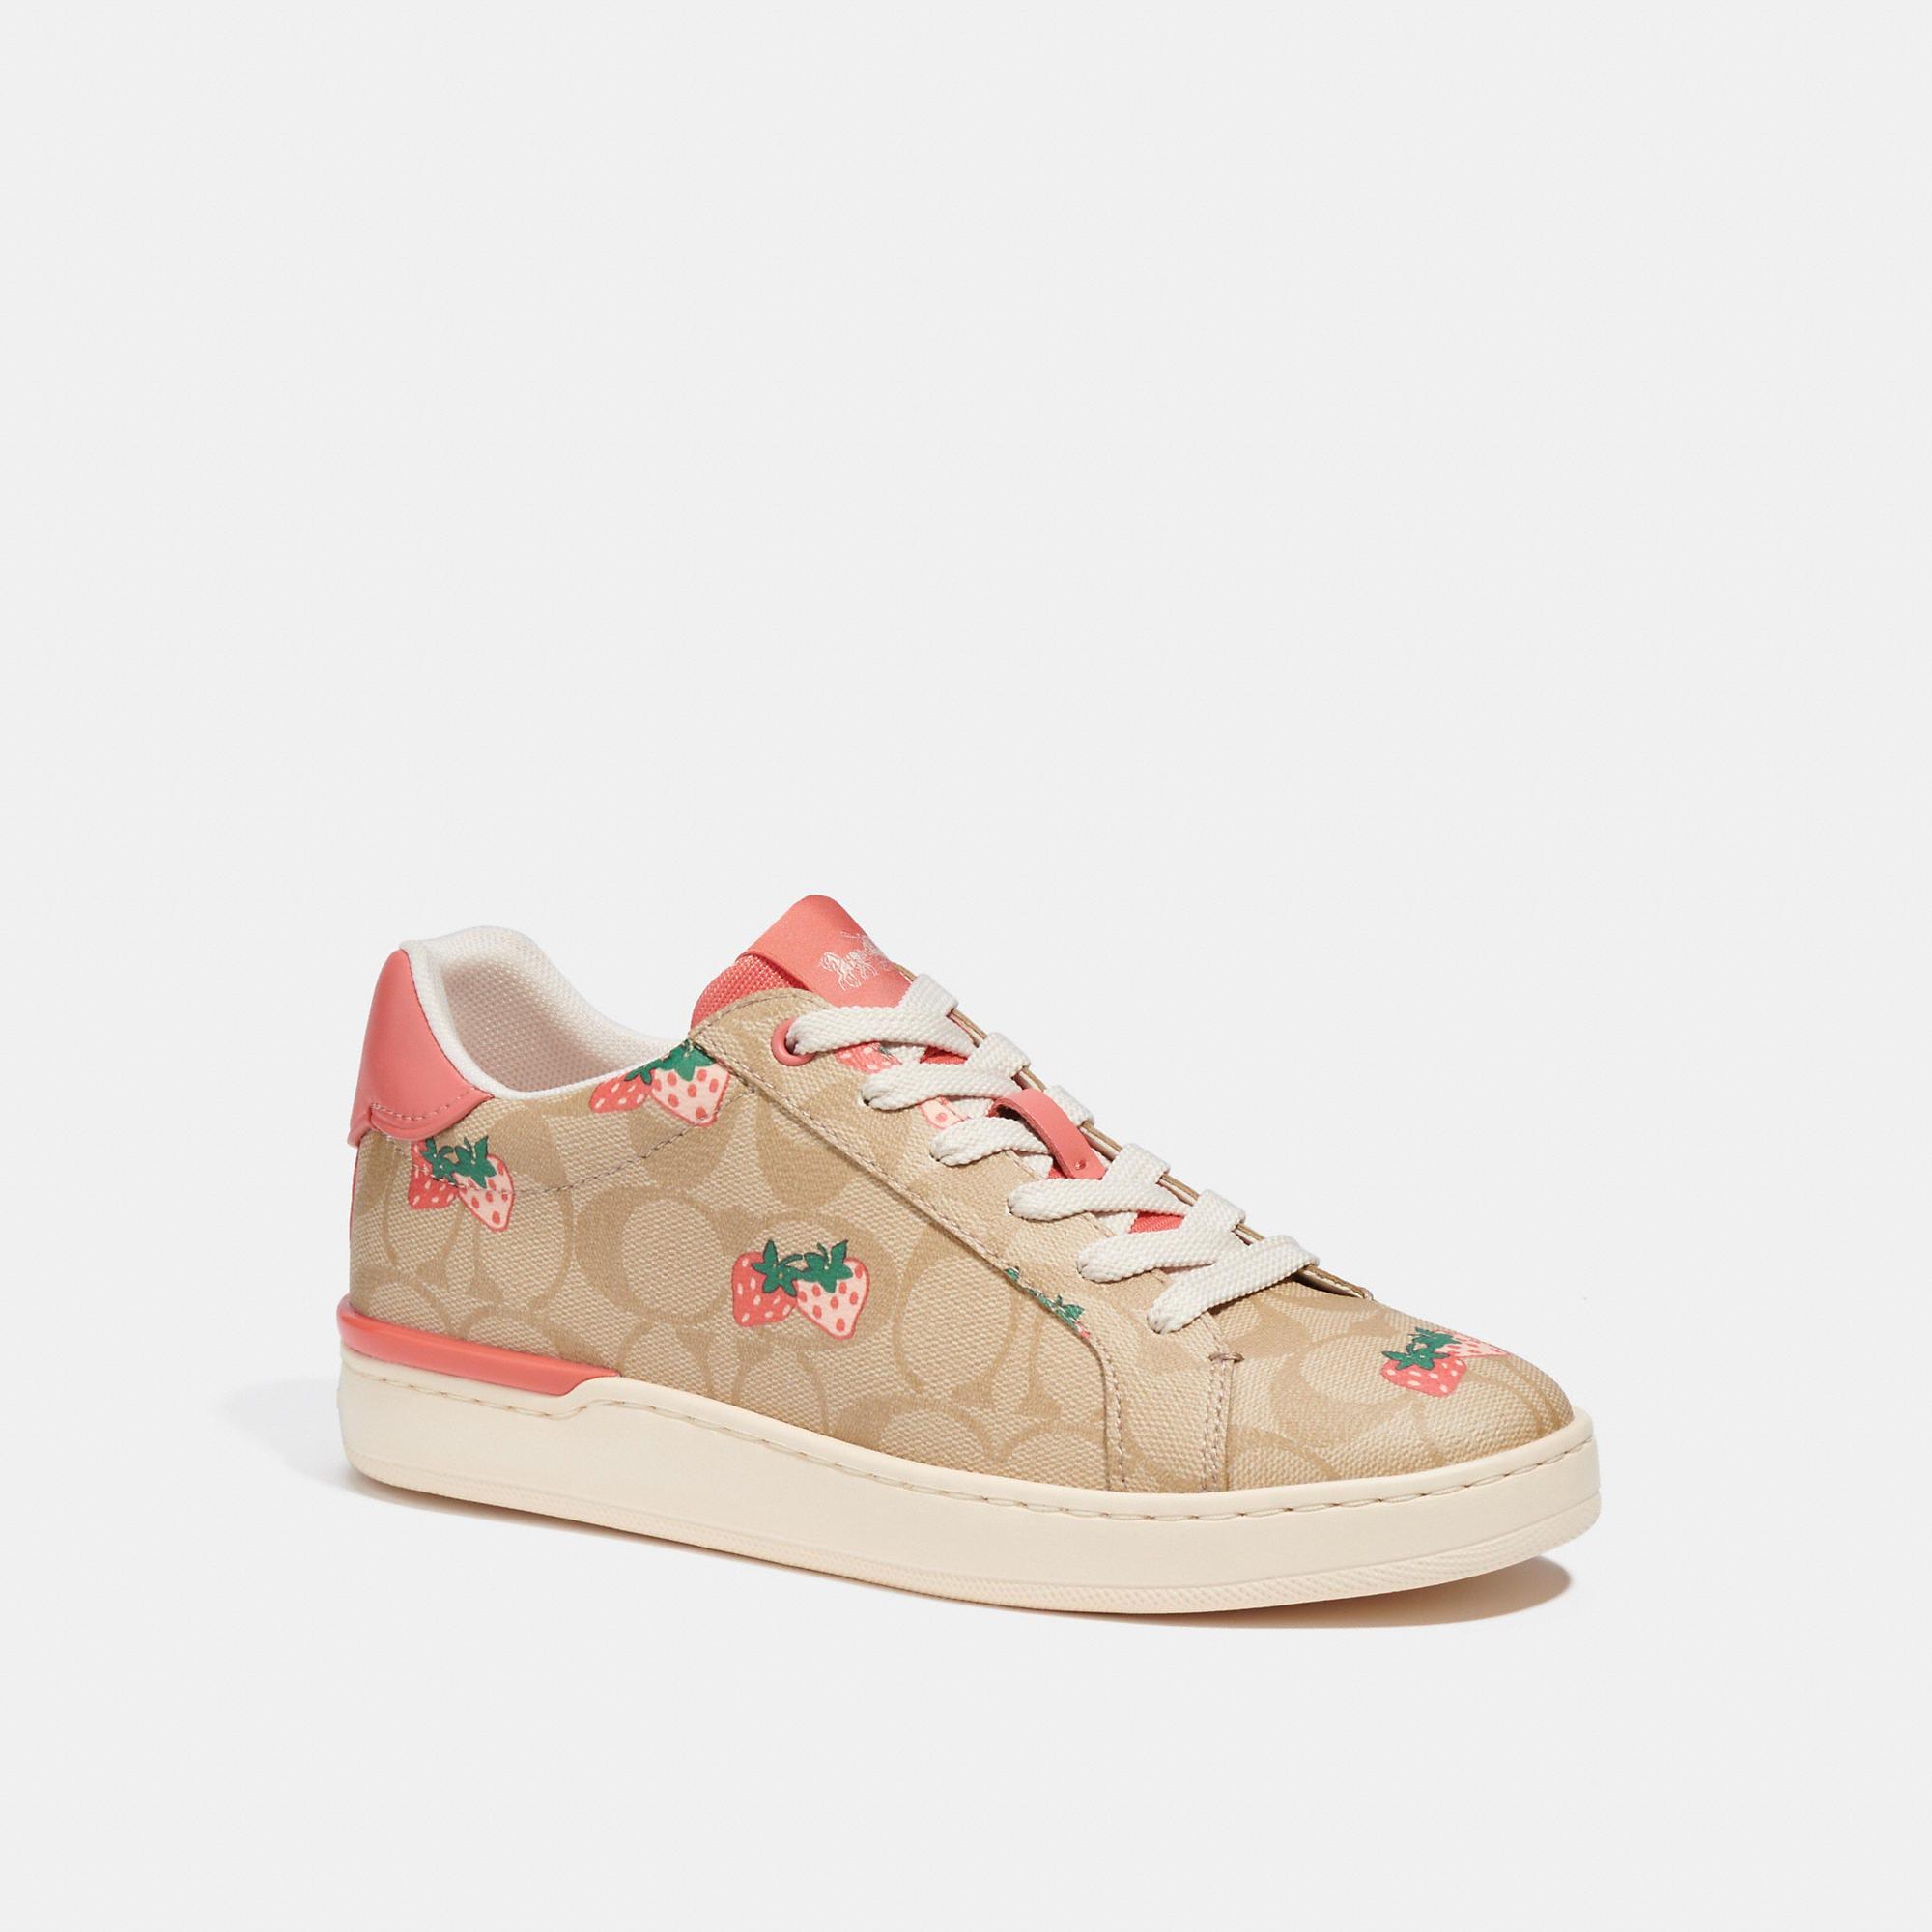 Coach Outlet Clip Low Top Sneaker With Strawberry Print in Pink